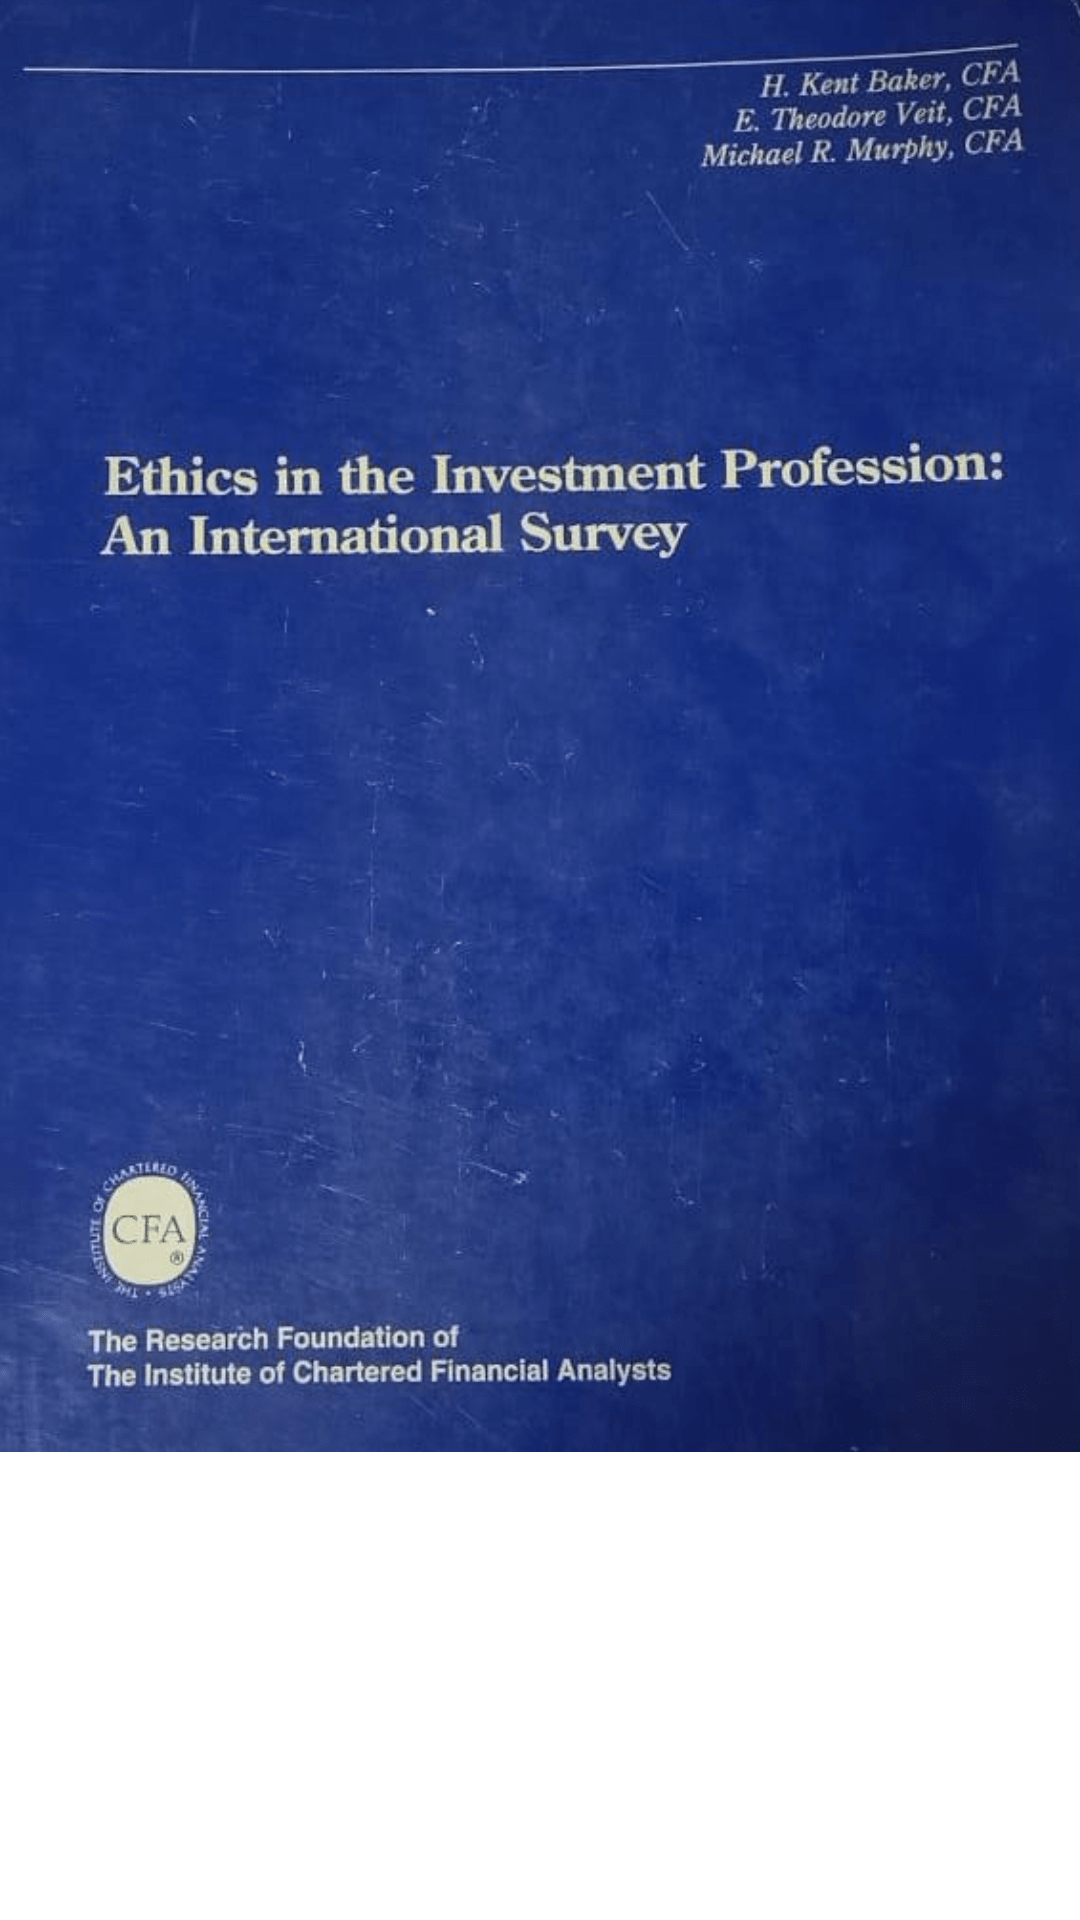 Ethics in the Investment Profession: An International Survey